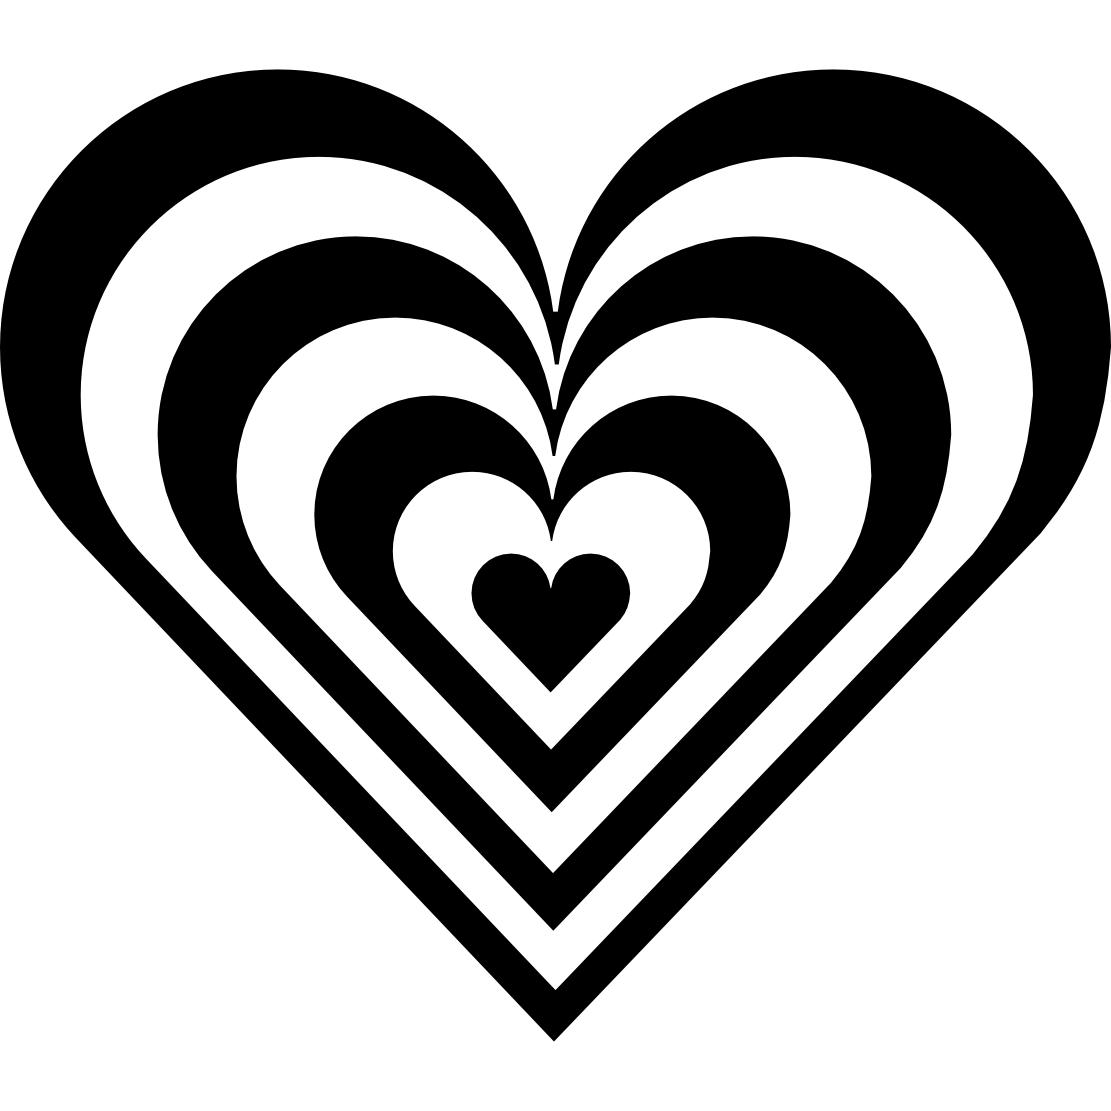 free black and white heart clipart - photo #6